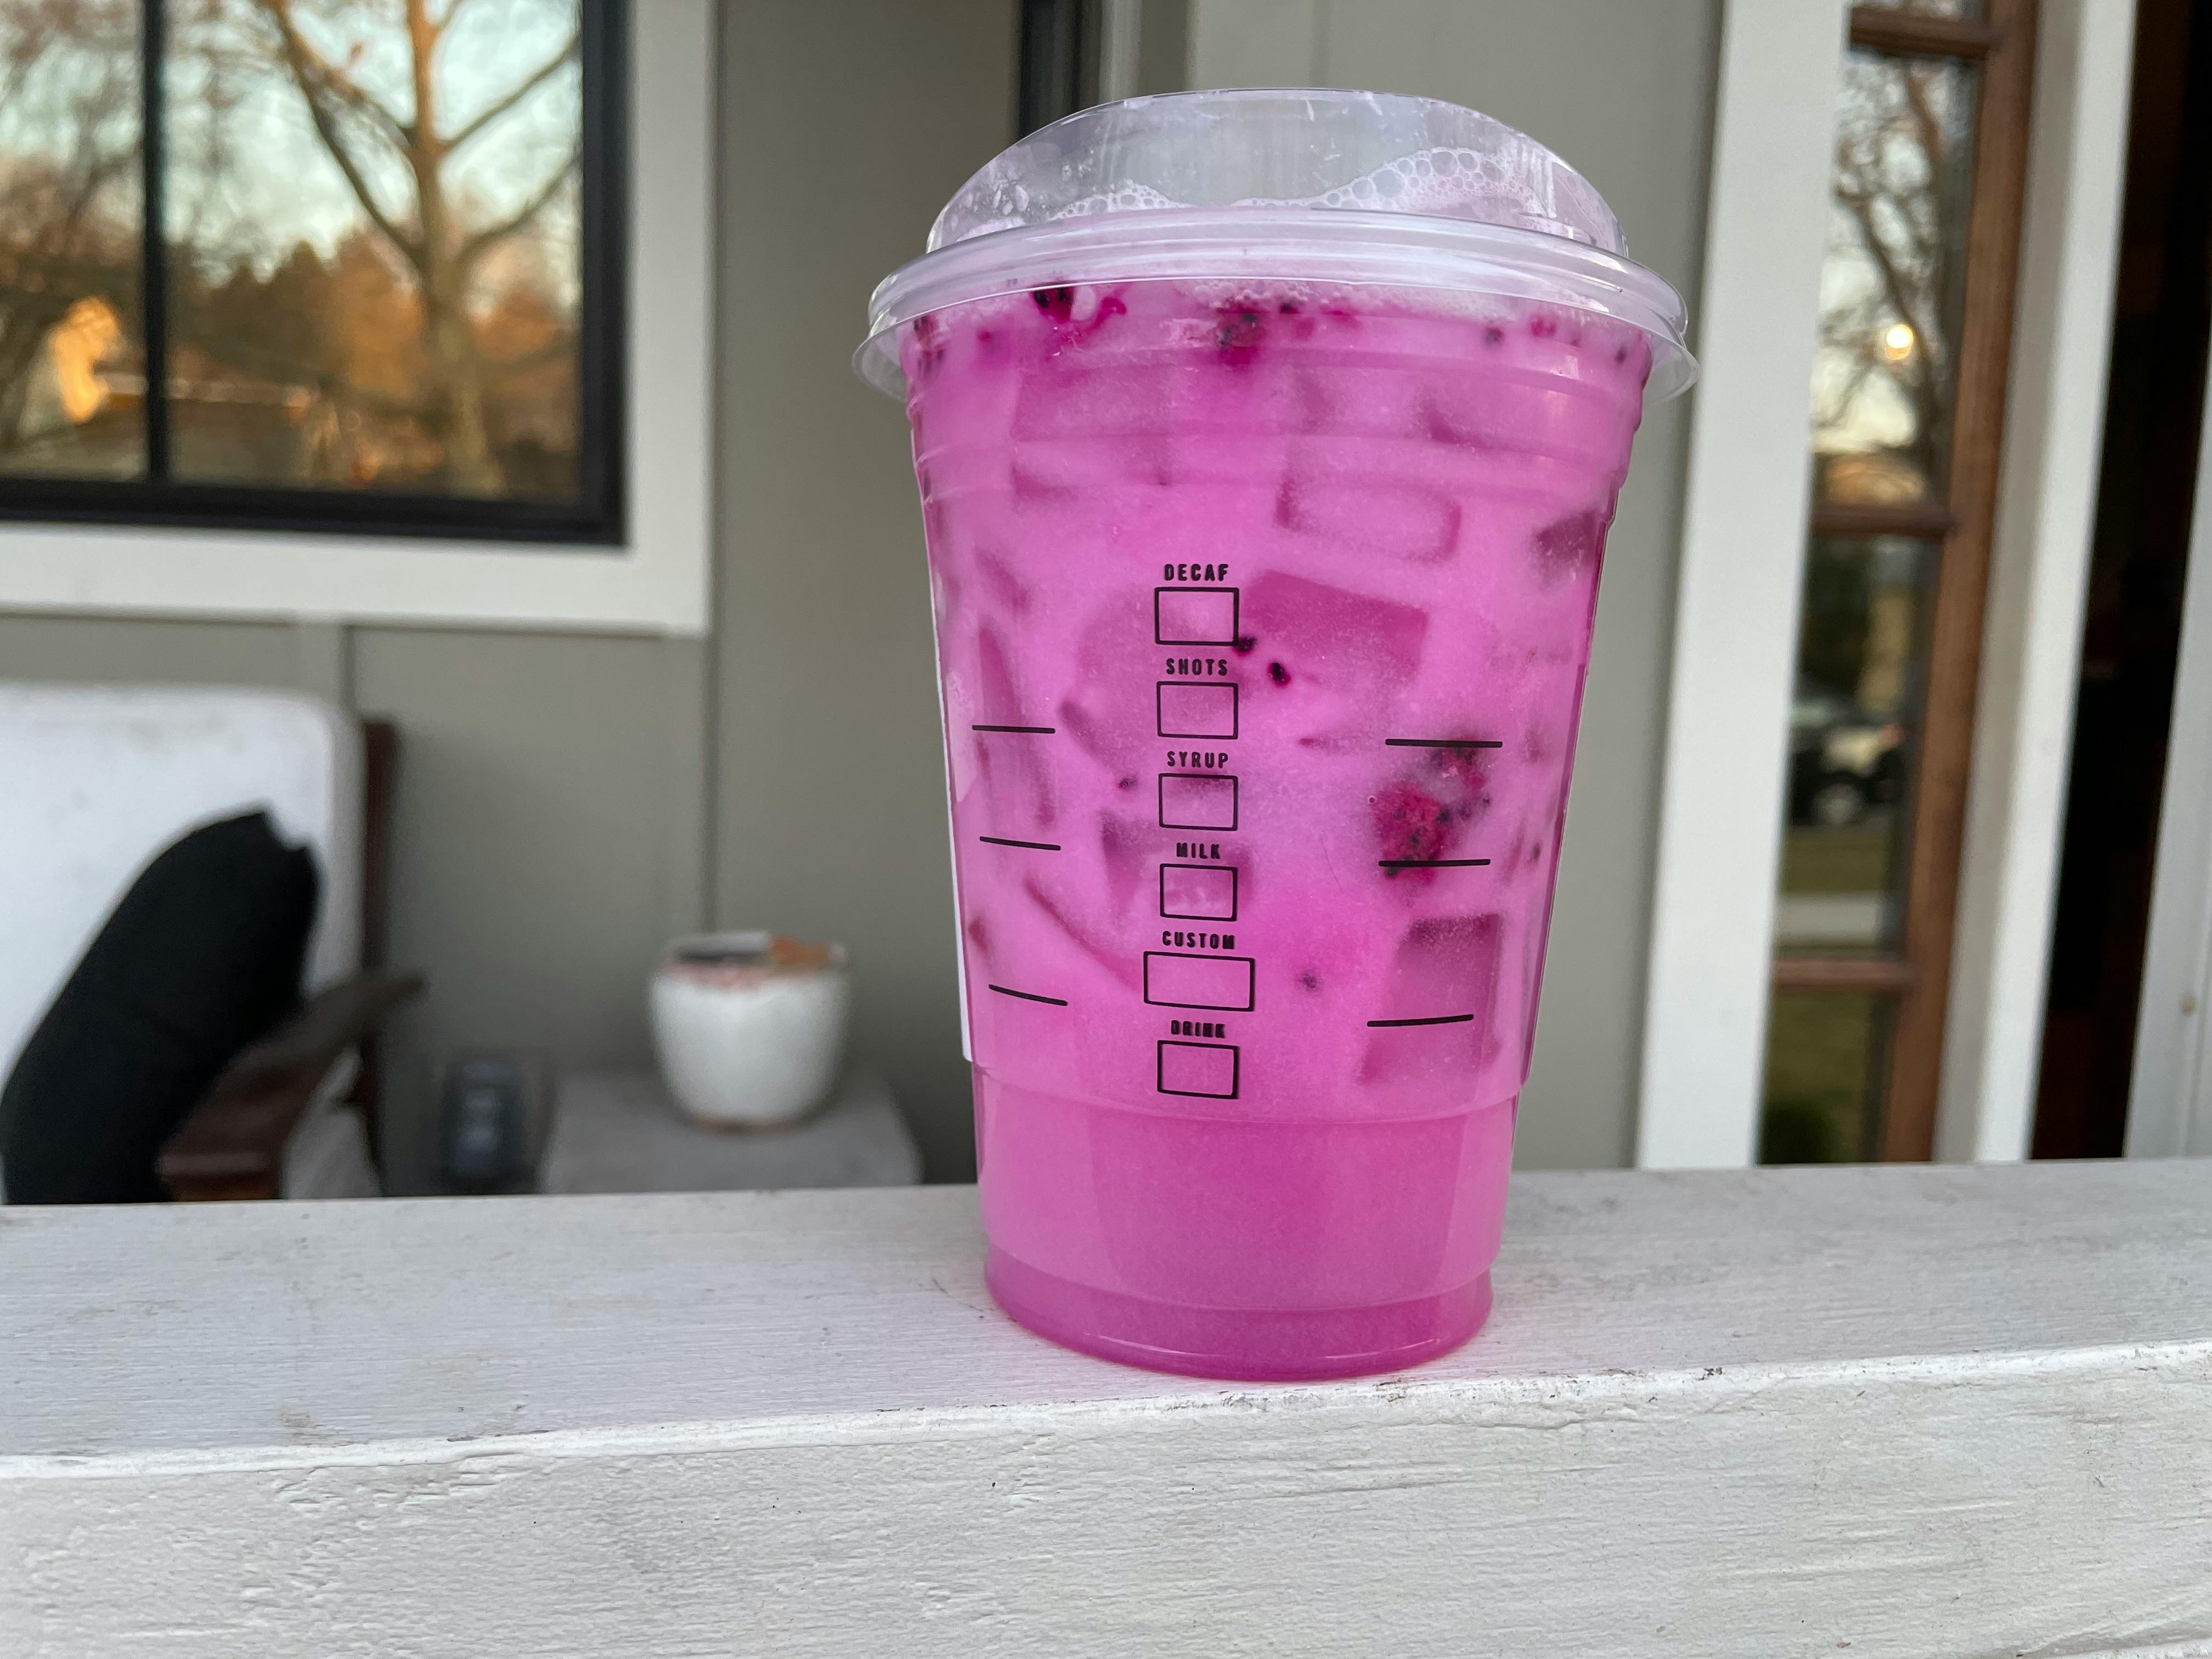 A Starbucks Grande Dragon Drink sitting on the bannister on someone's front porch.